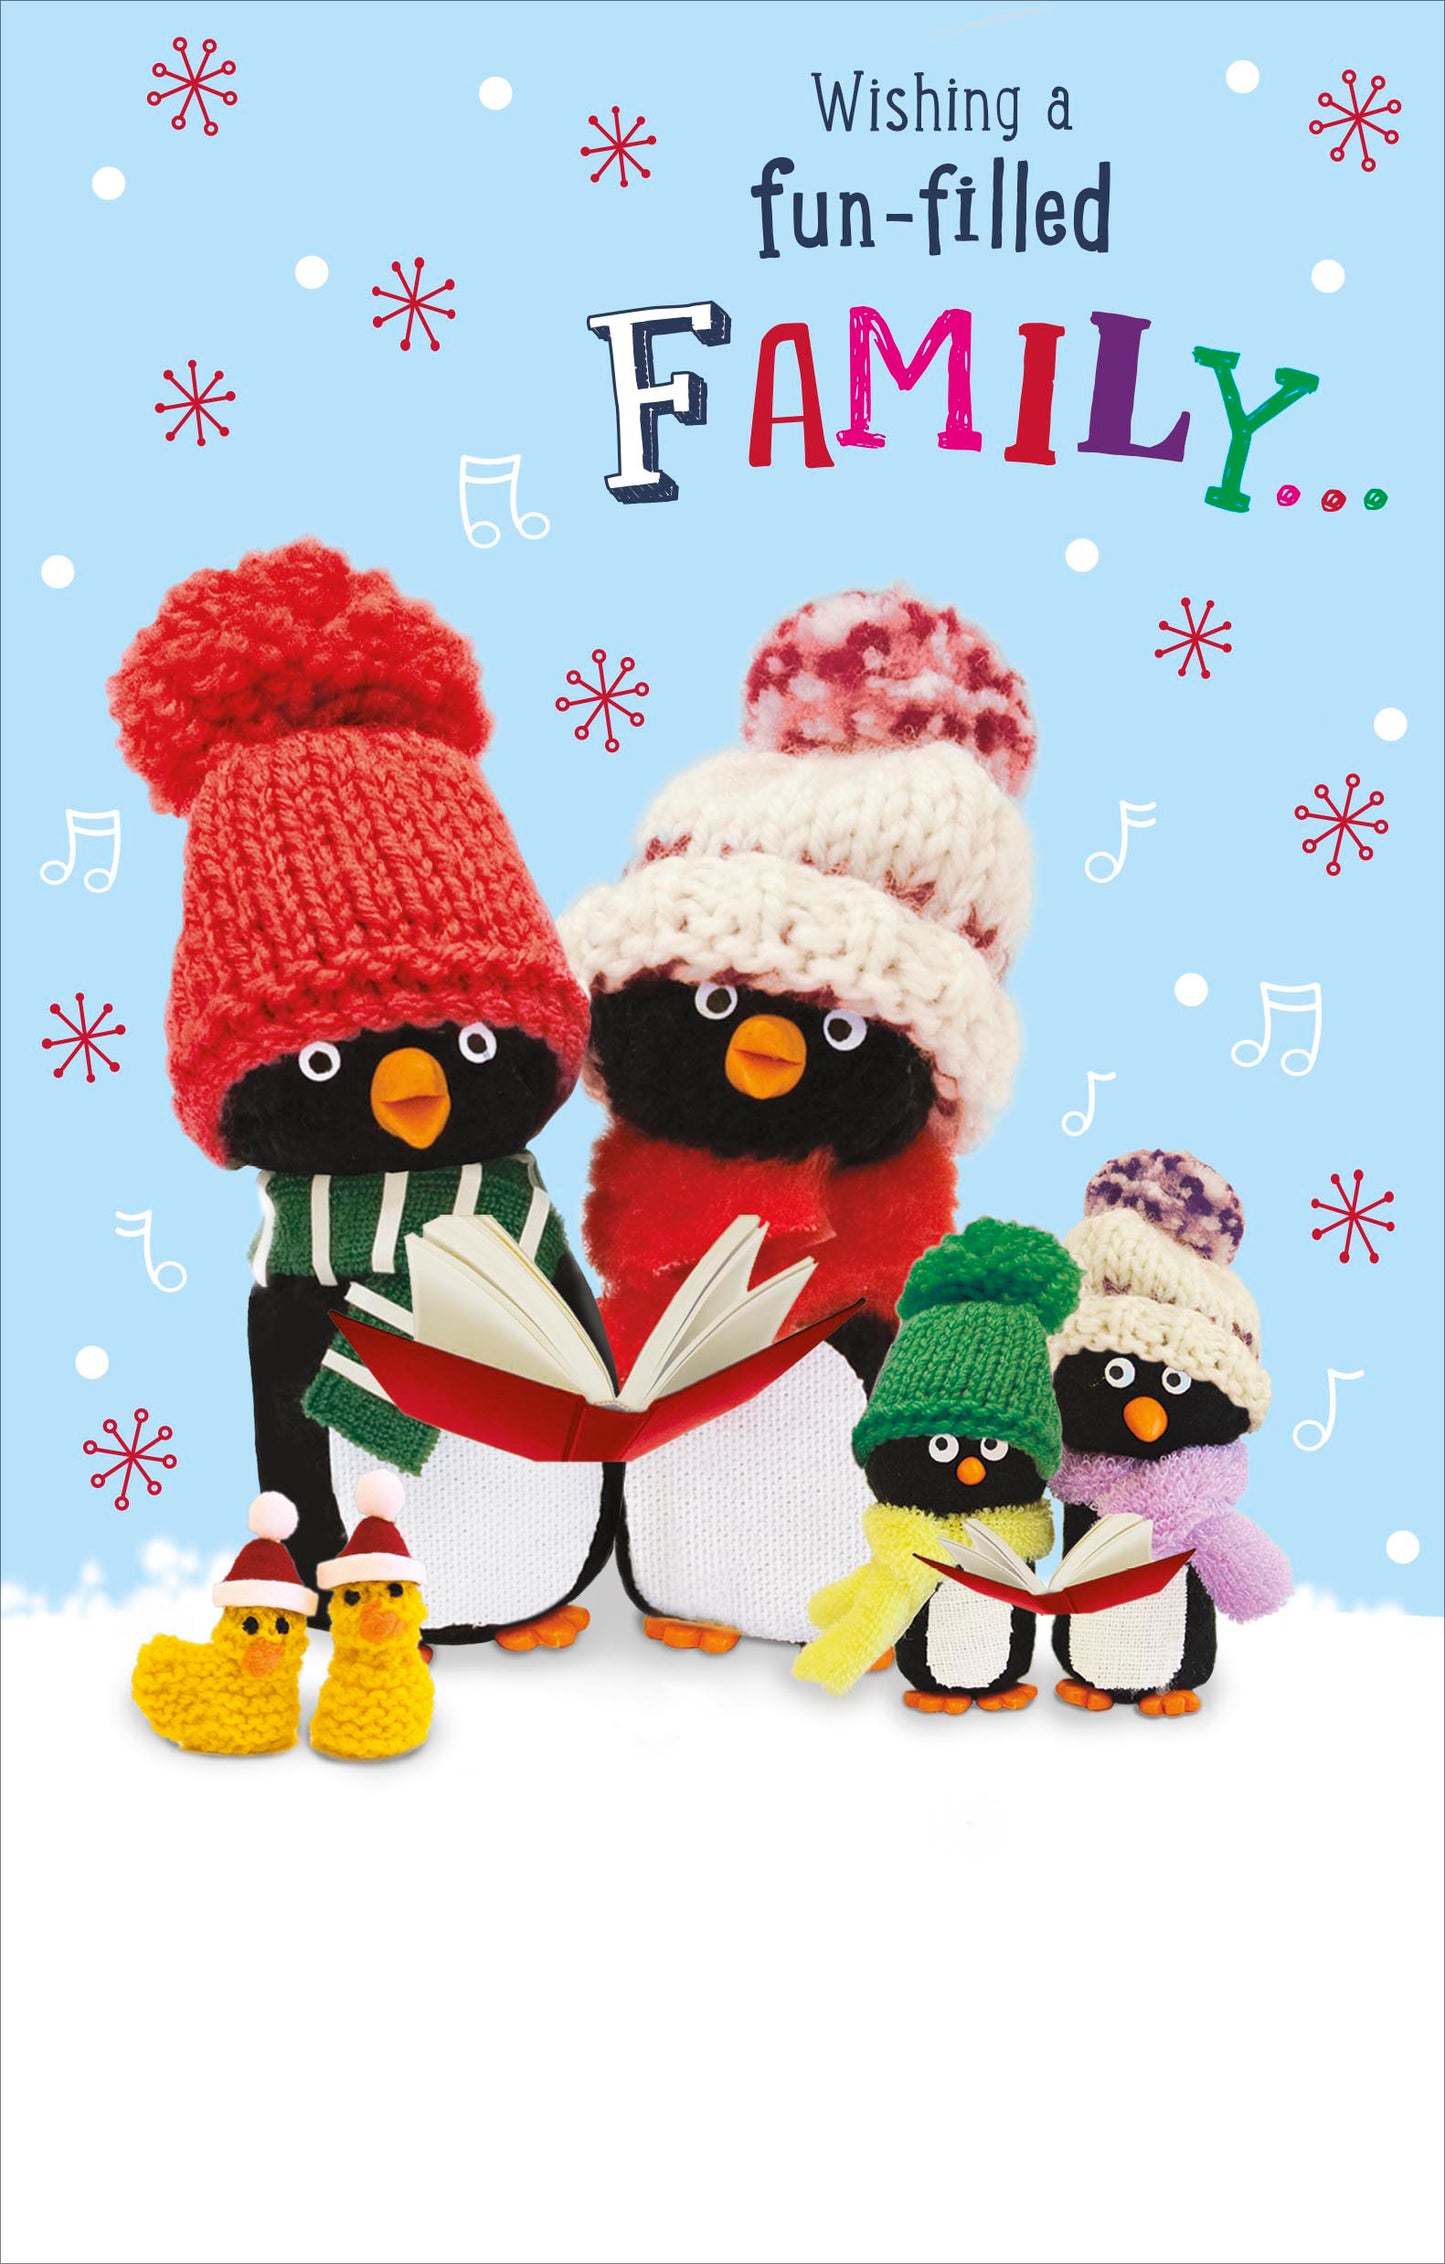 Fun-Filled Family Penguin Pals Christmas Card